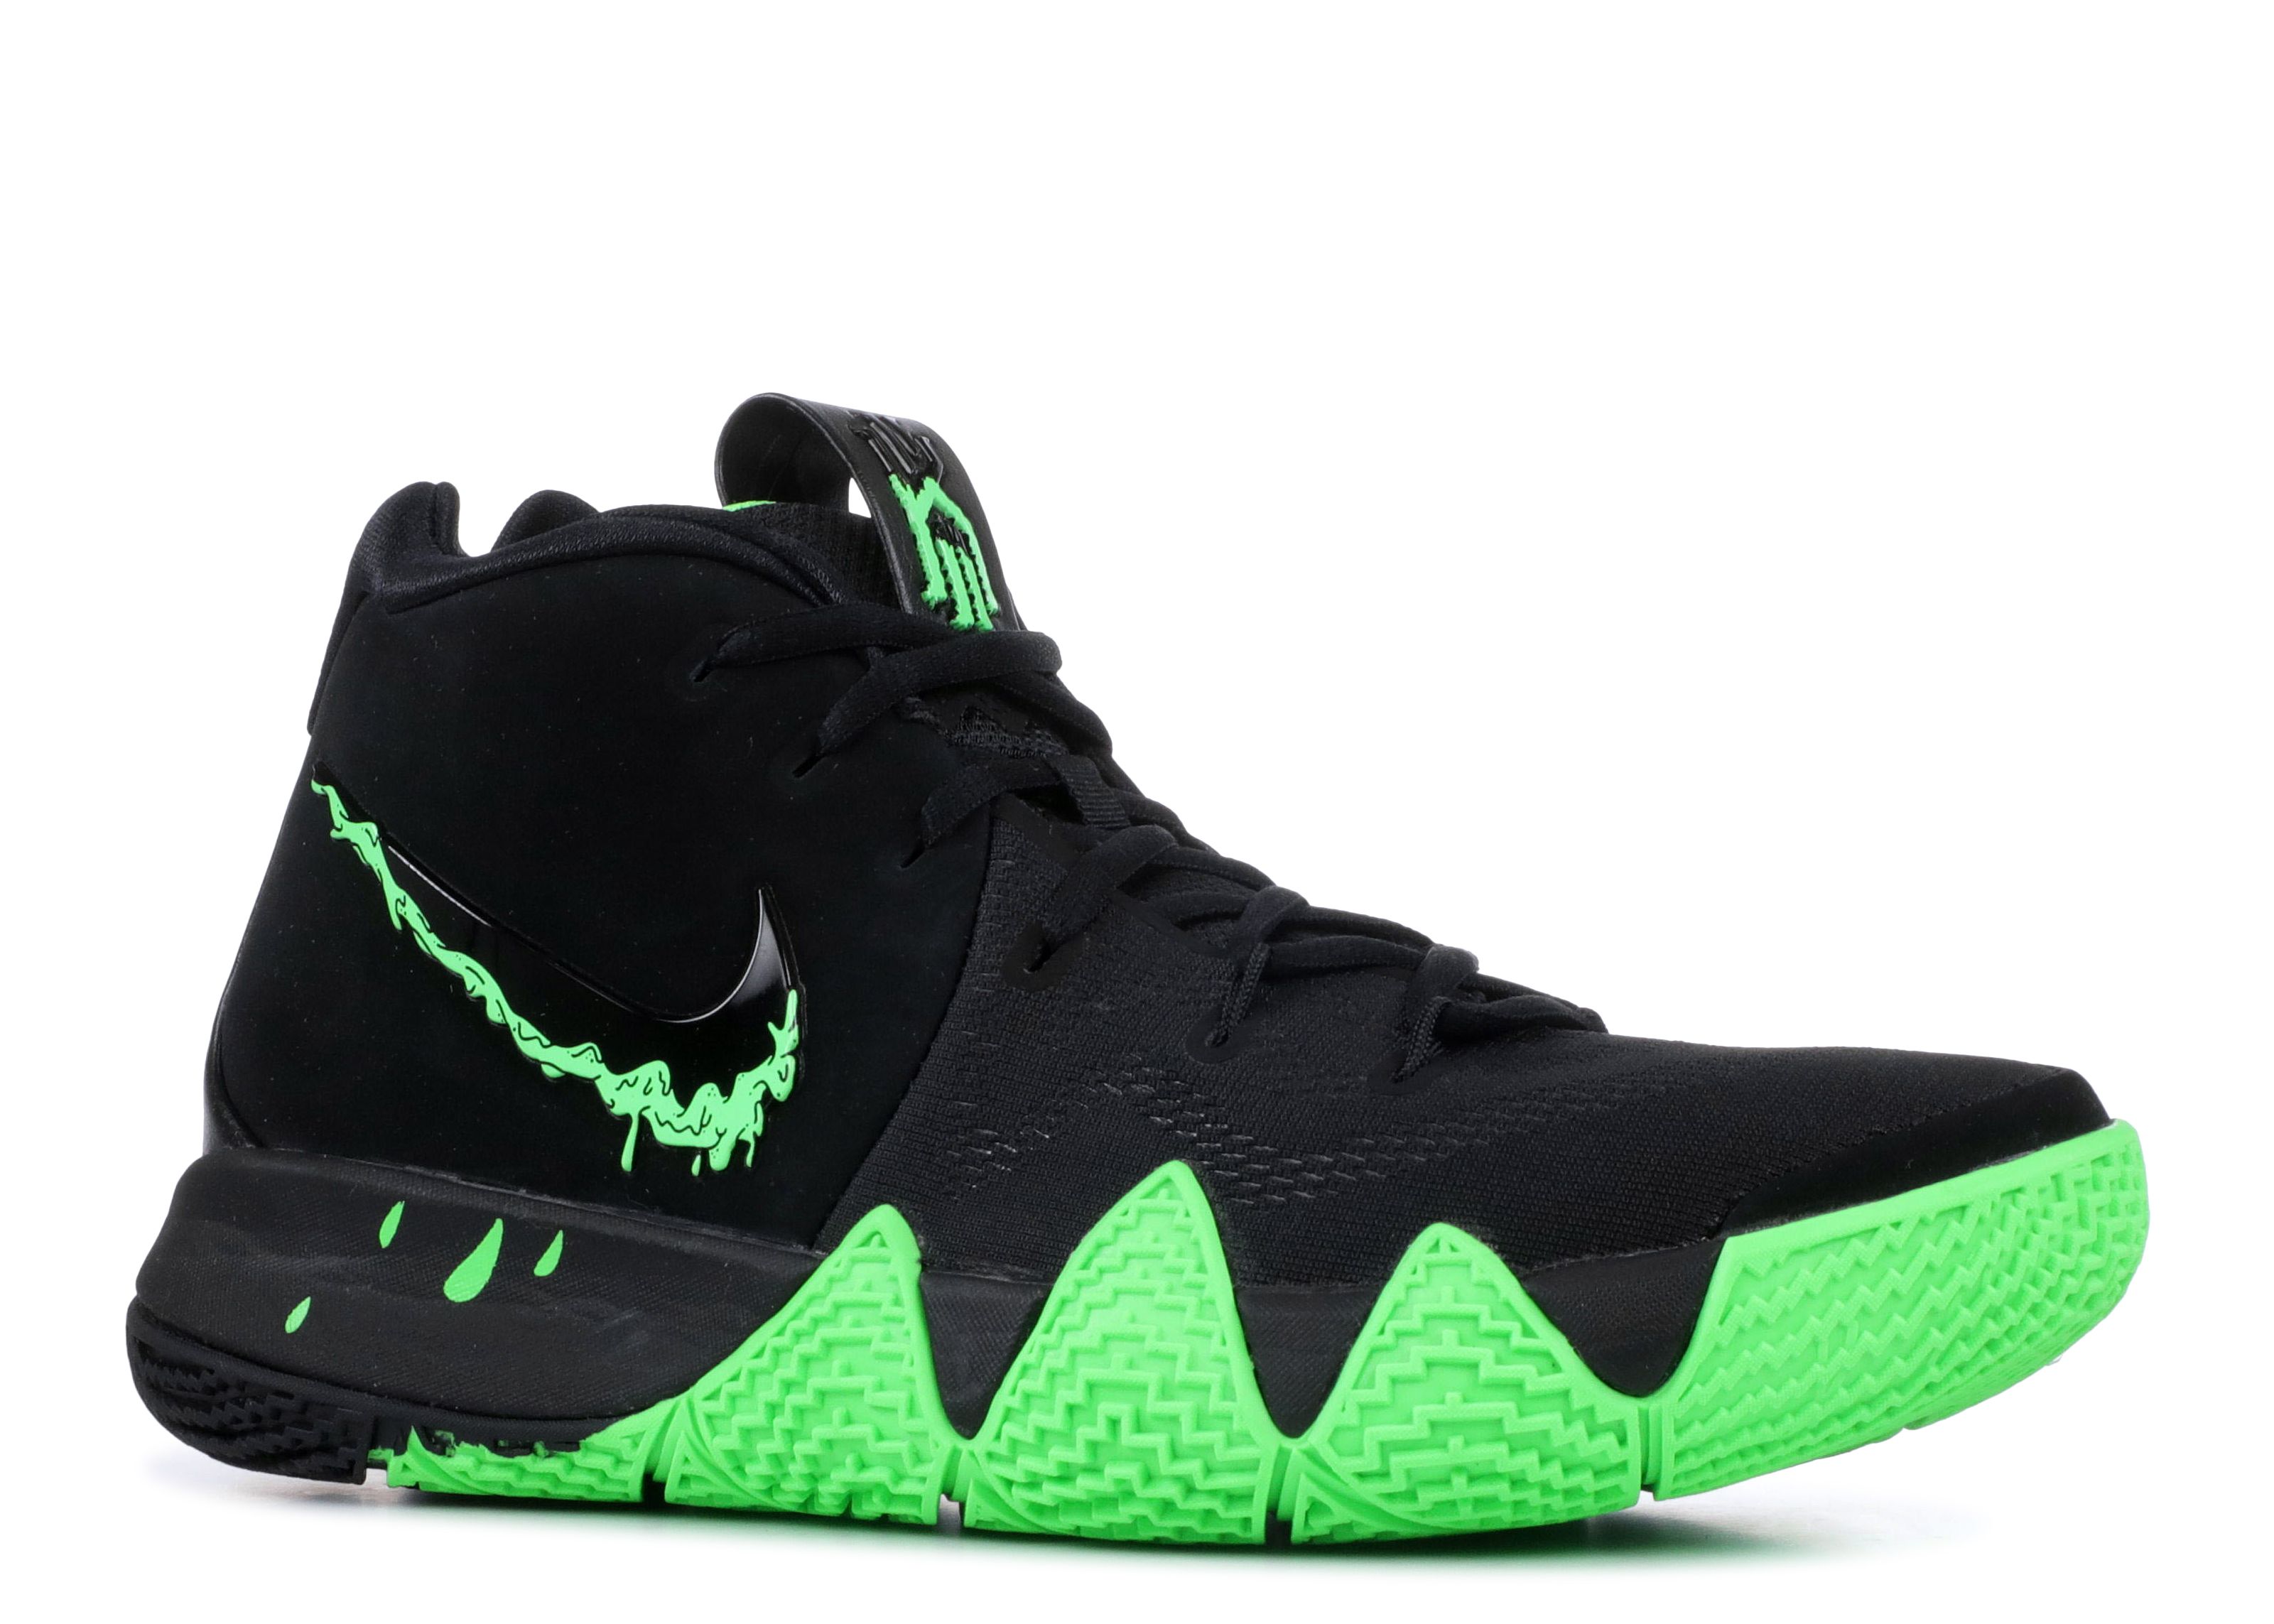 kyrie 4 rage green and black